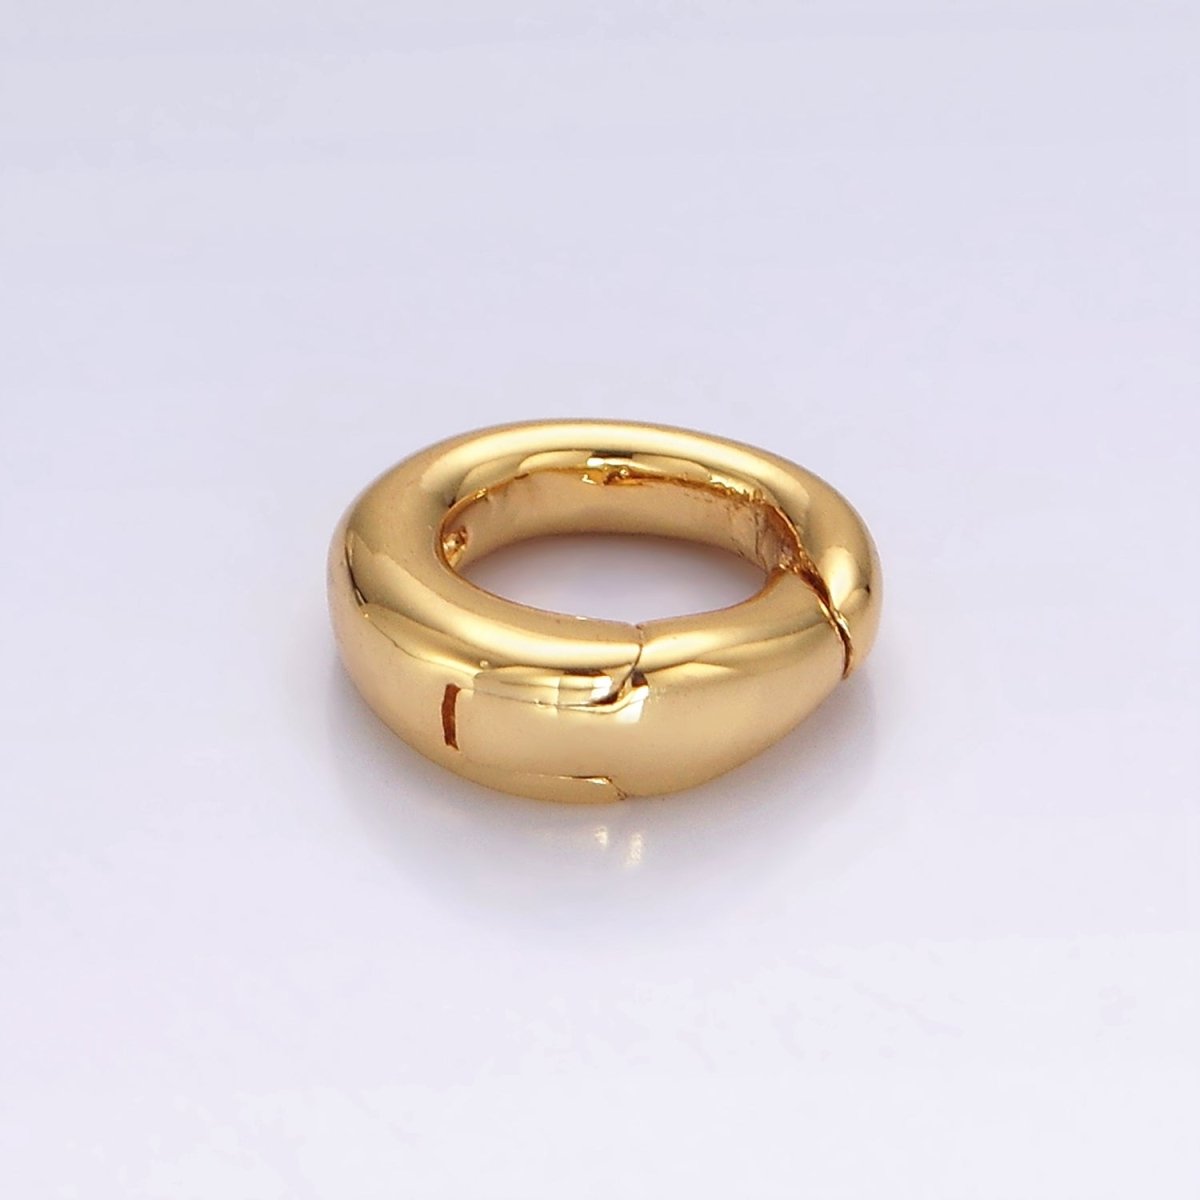 14K Gold Filled 14.5mm, 10mm Push Round Spring Gate Ring Jewelry Closure Findings Supply | Z570 Z571 - DLUXCA